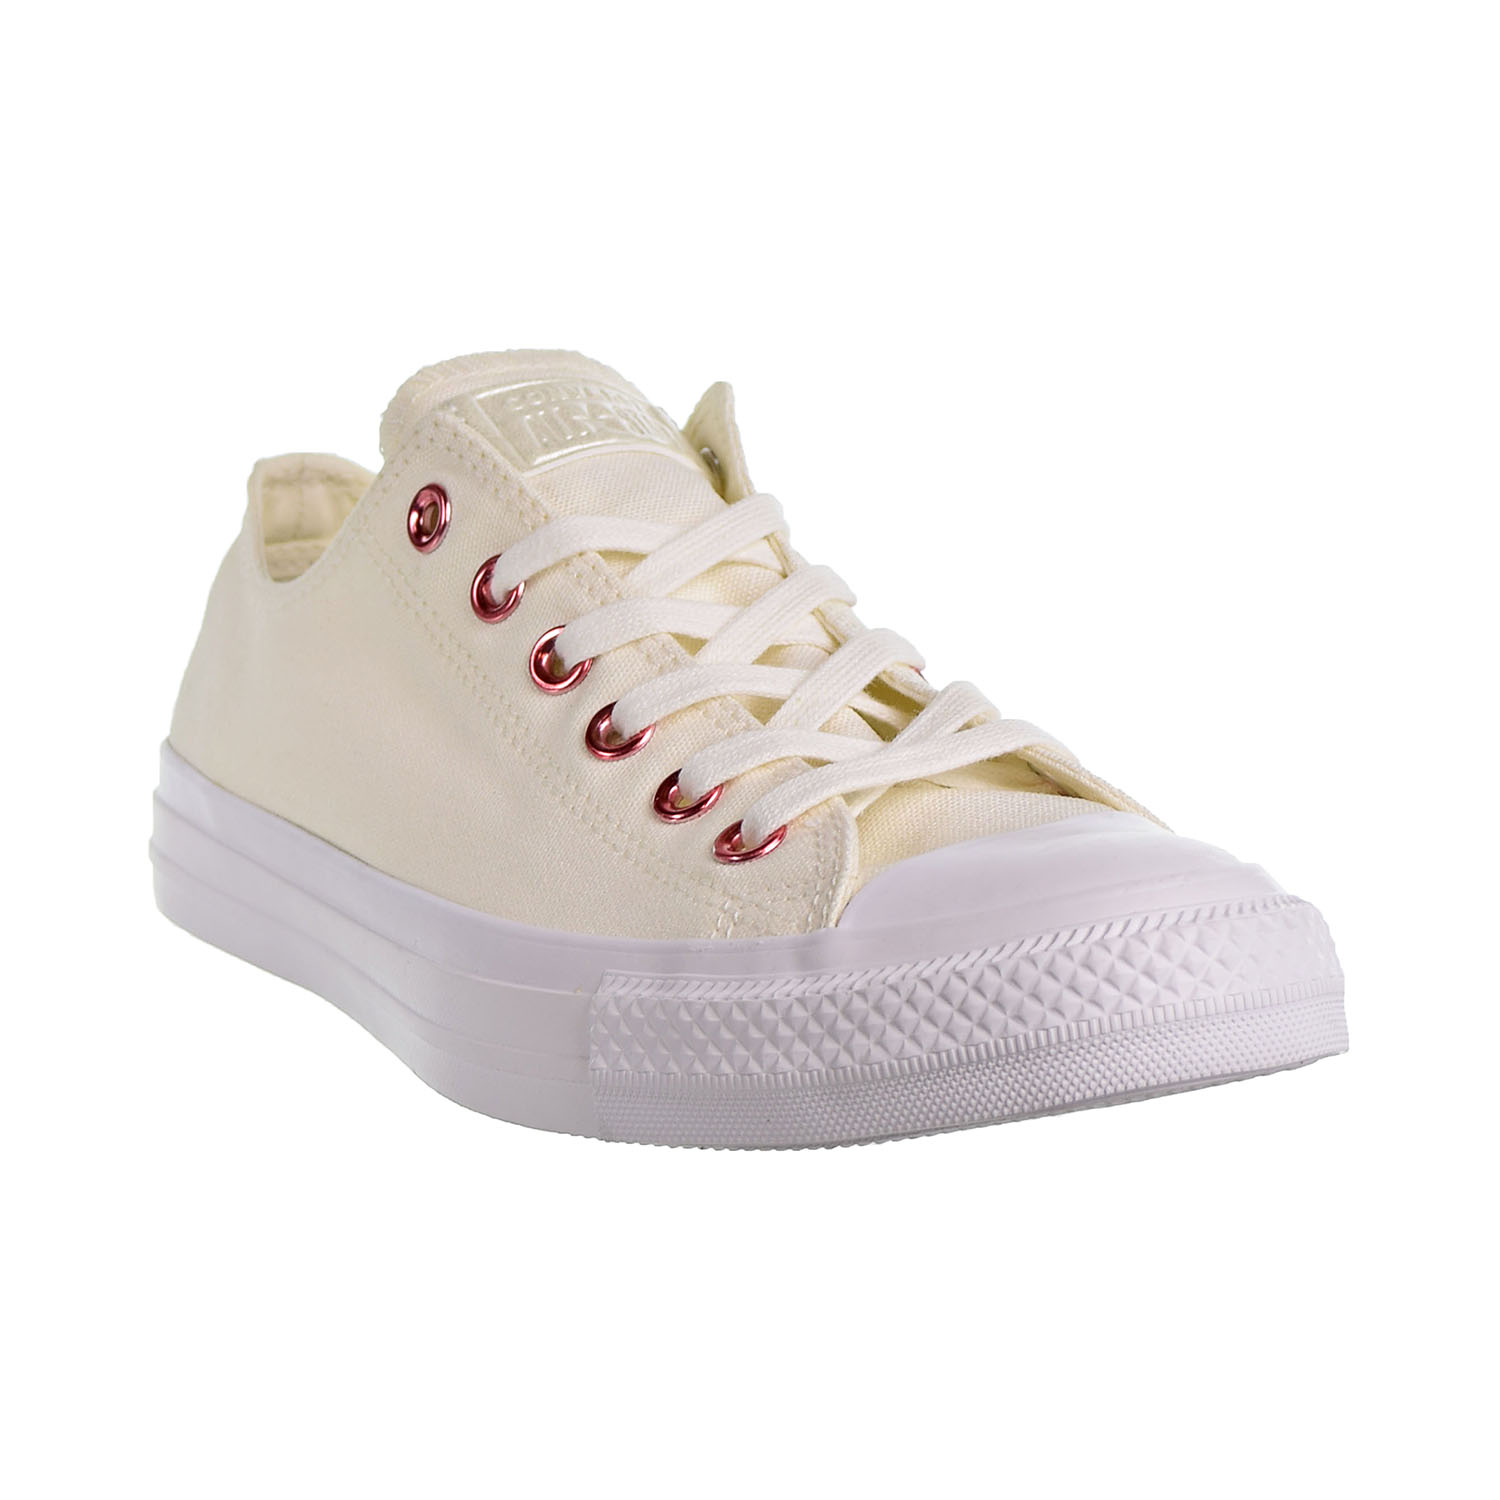 Converse Chuck Taylor All Star Ox Hearts Unisex Shoes Egret-Rhubarb-White 163283c - image 2 of 6